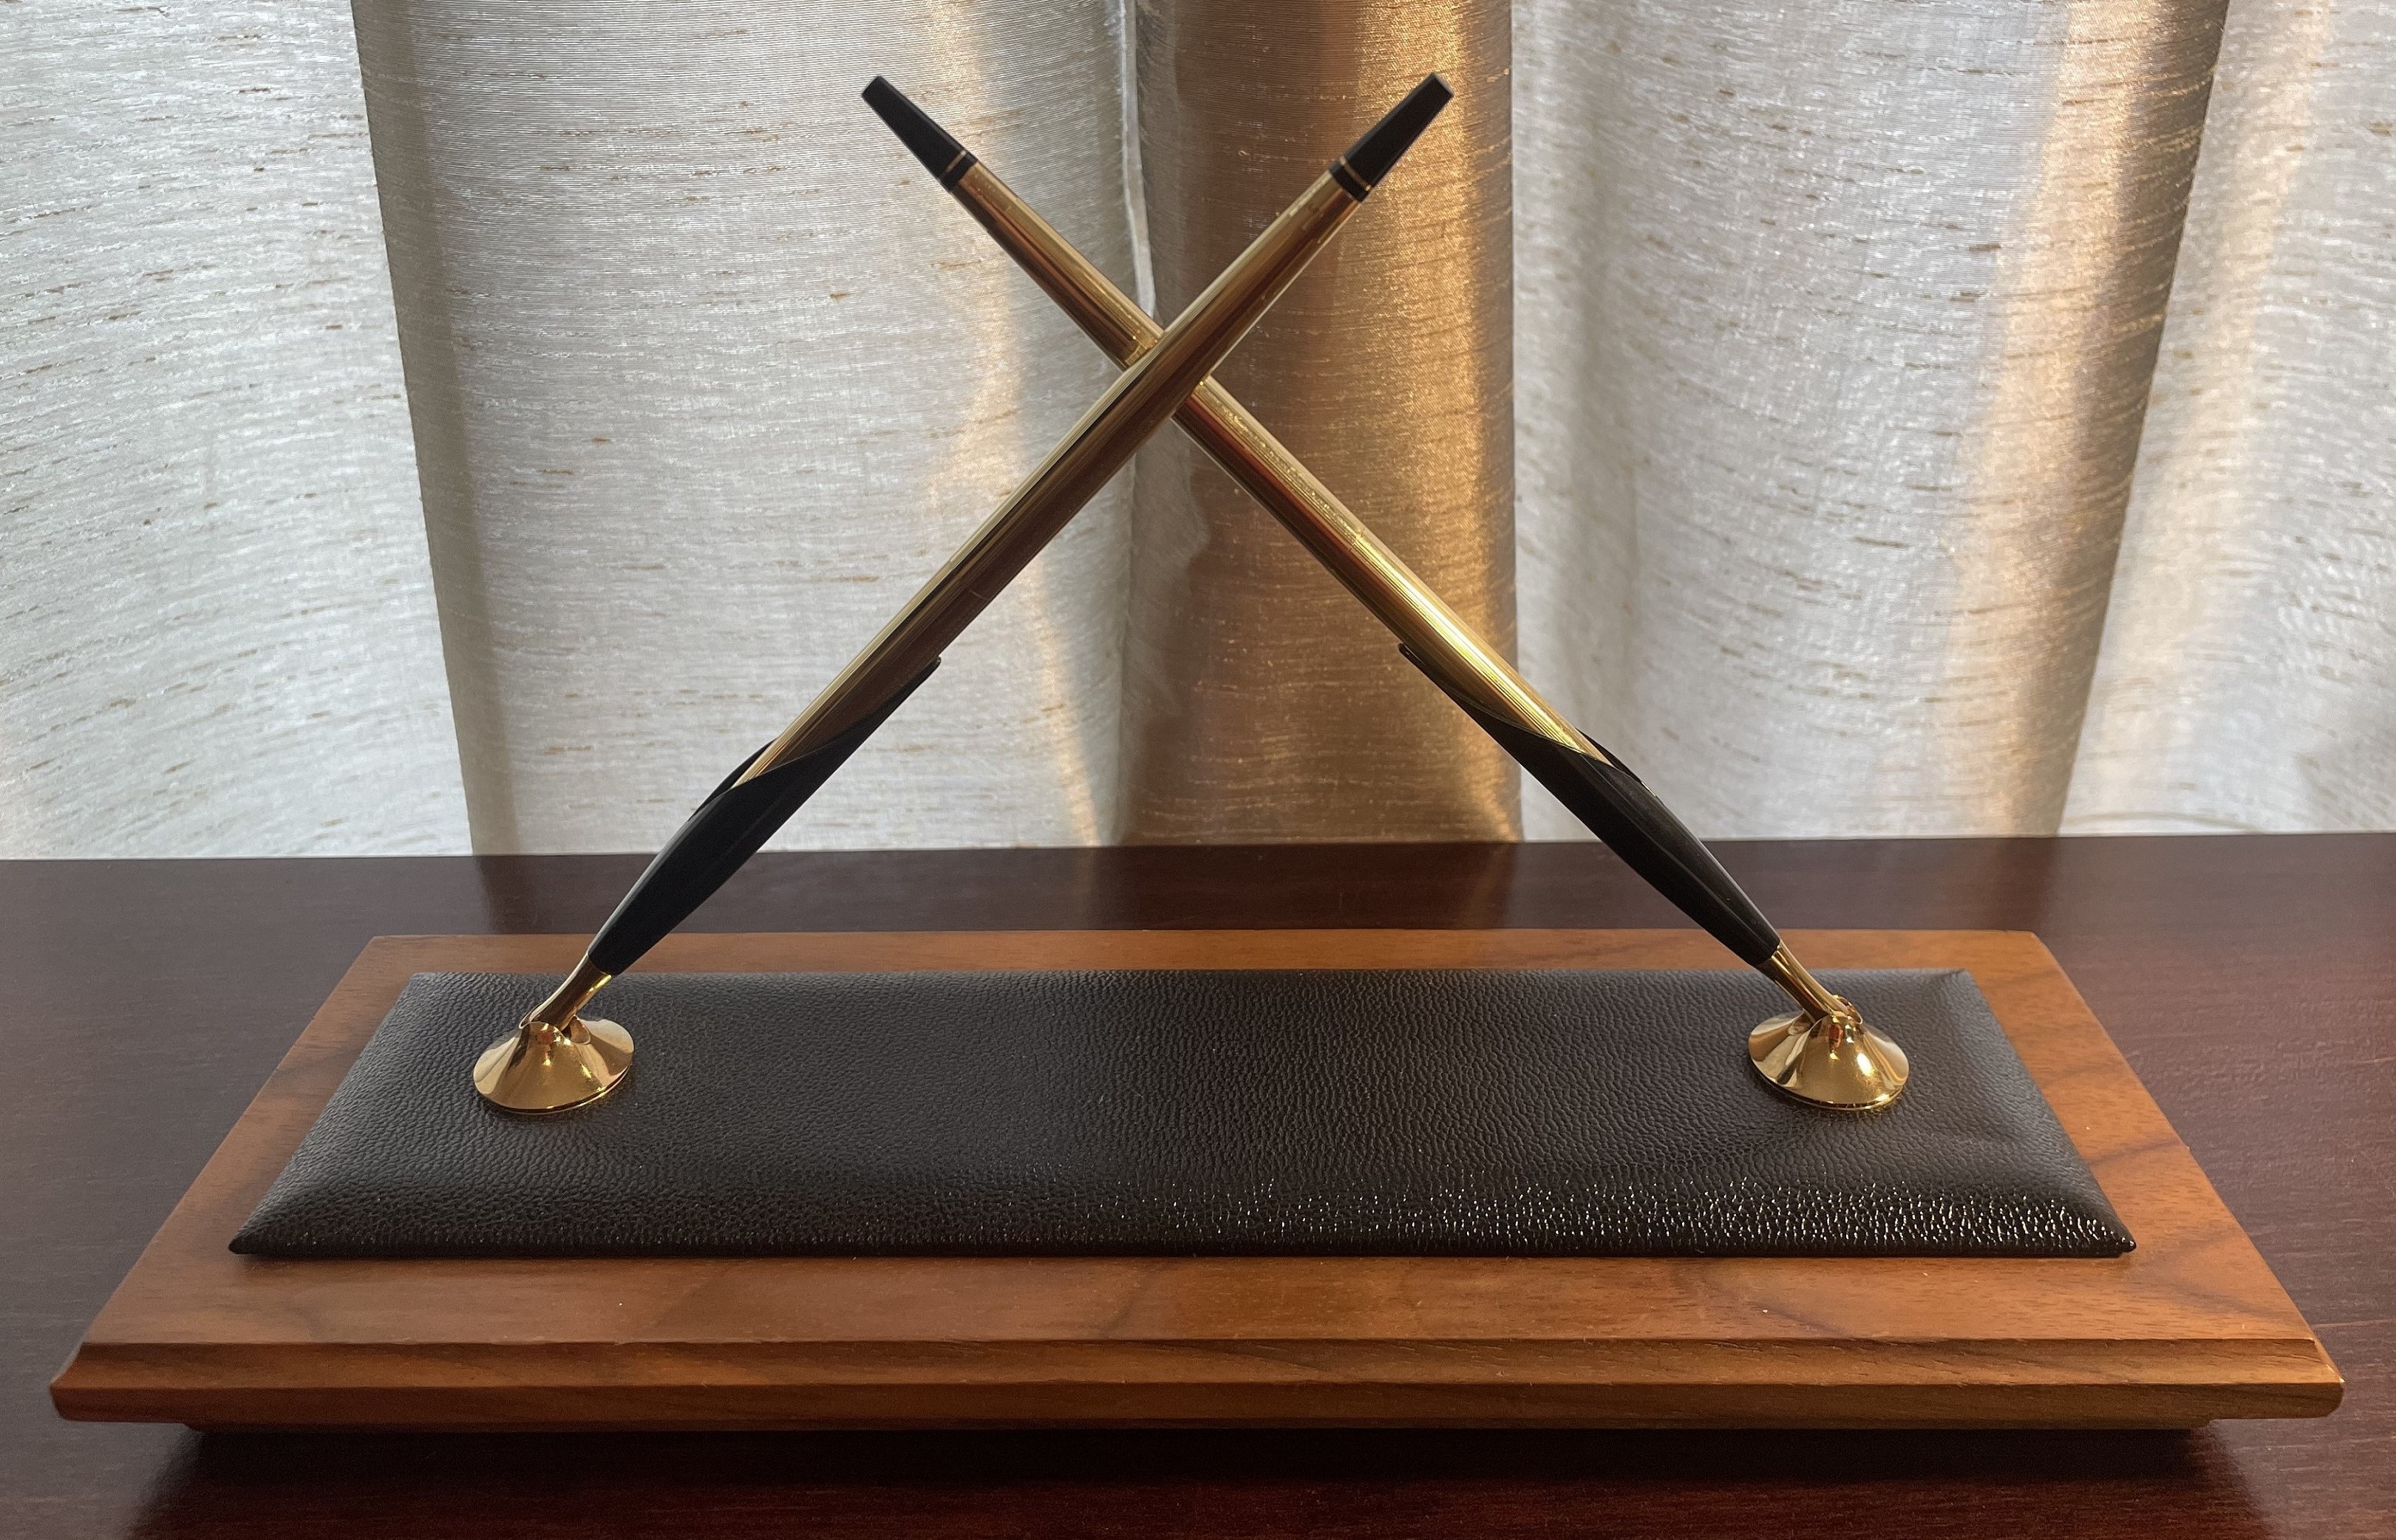 Pens and Pencils: : Cross: Classic Century Walnut and Leather